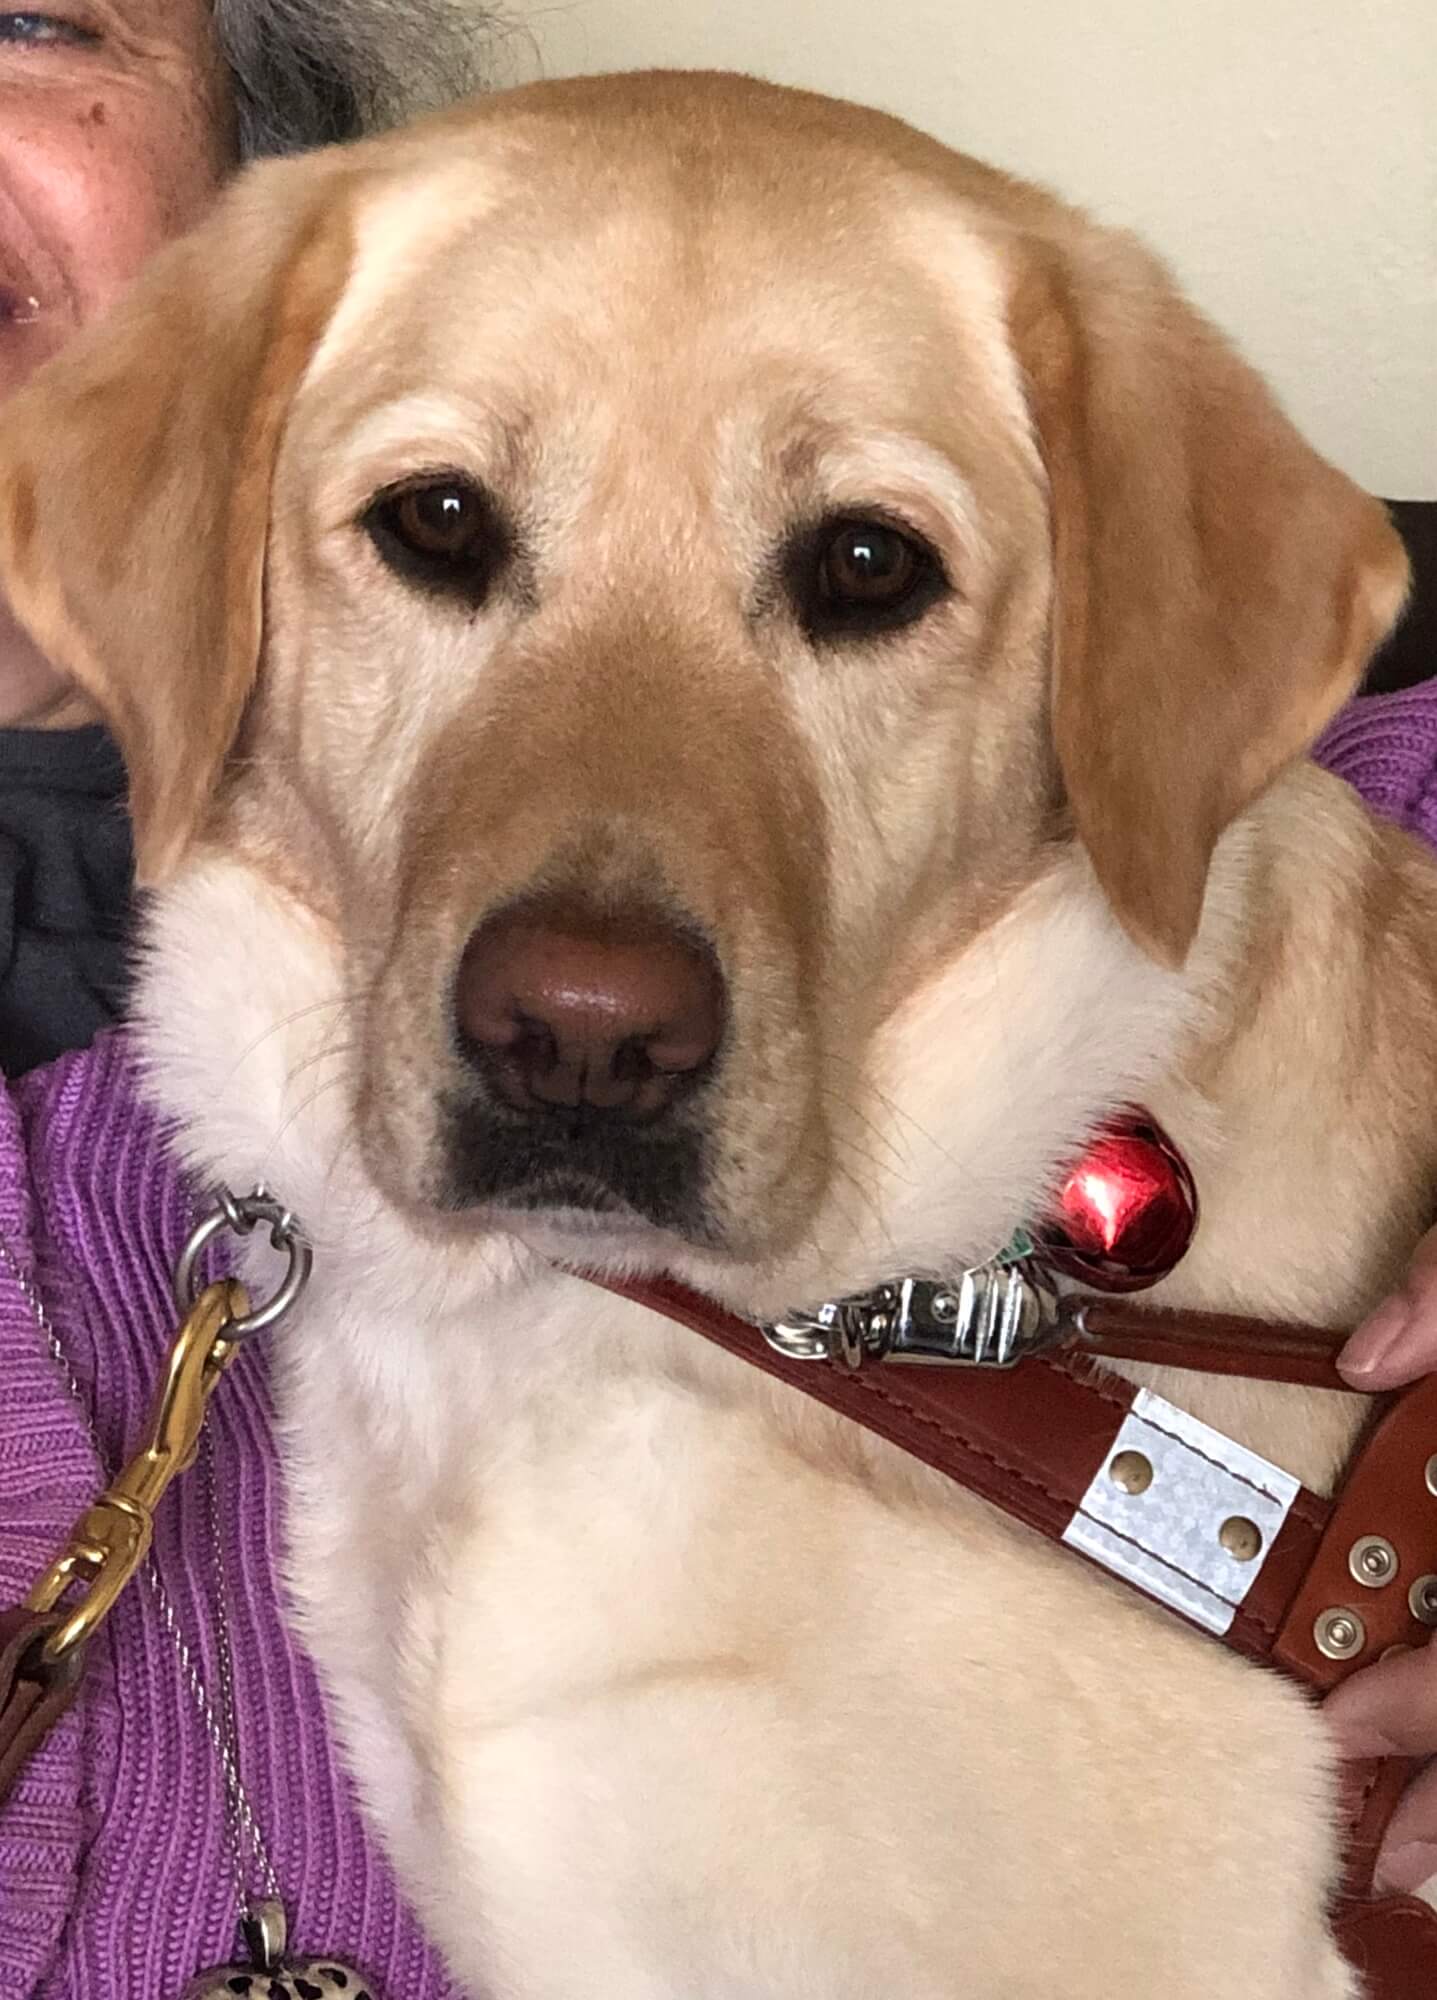 Beautiful guide dog Twig looks seriously ahead at the camera